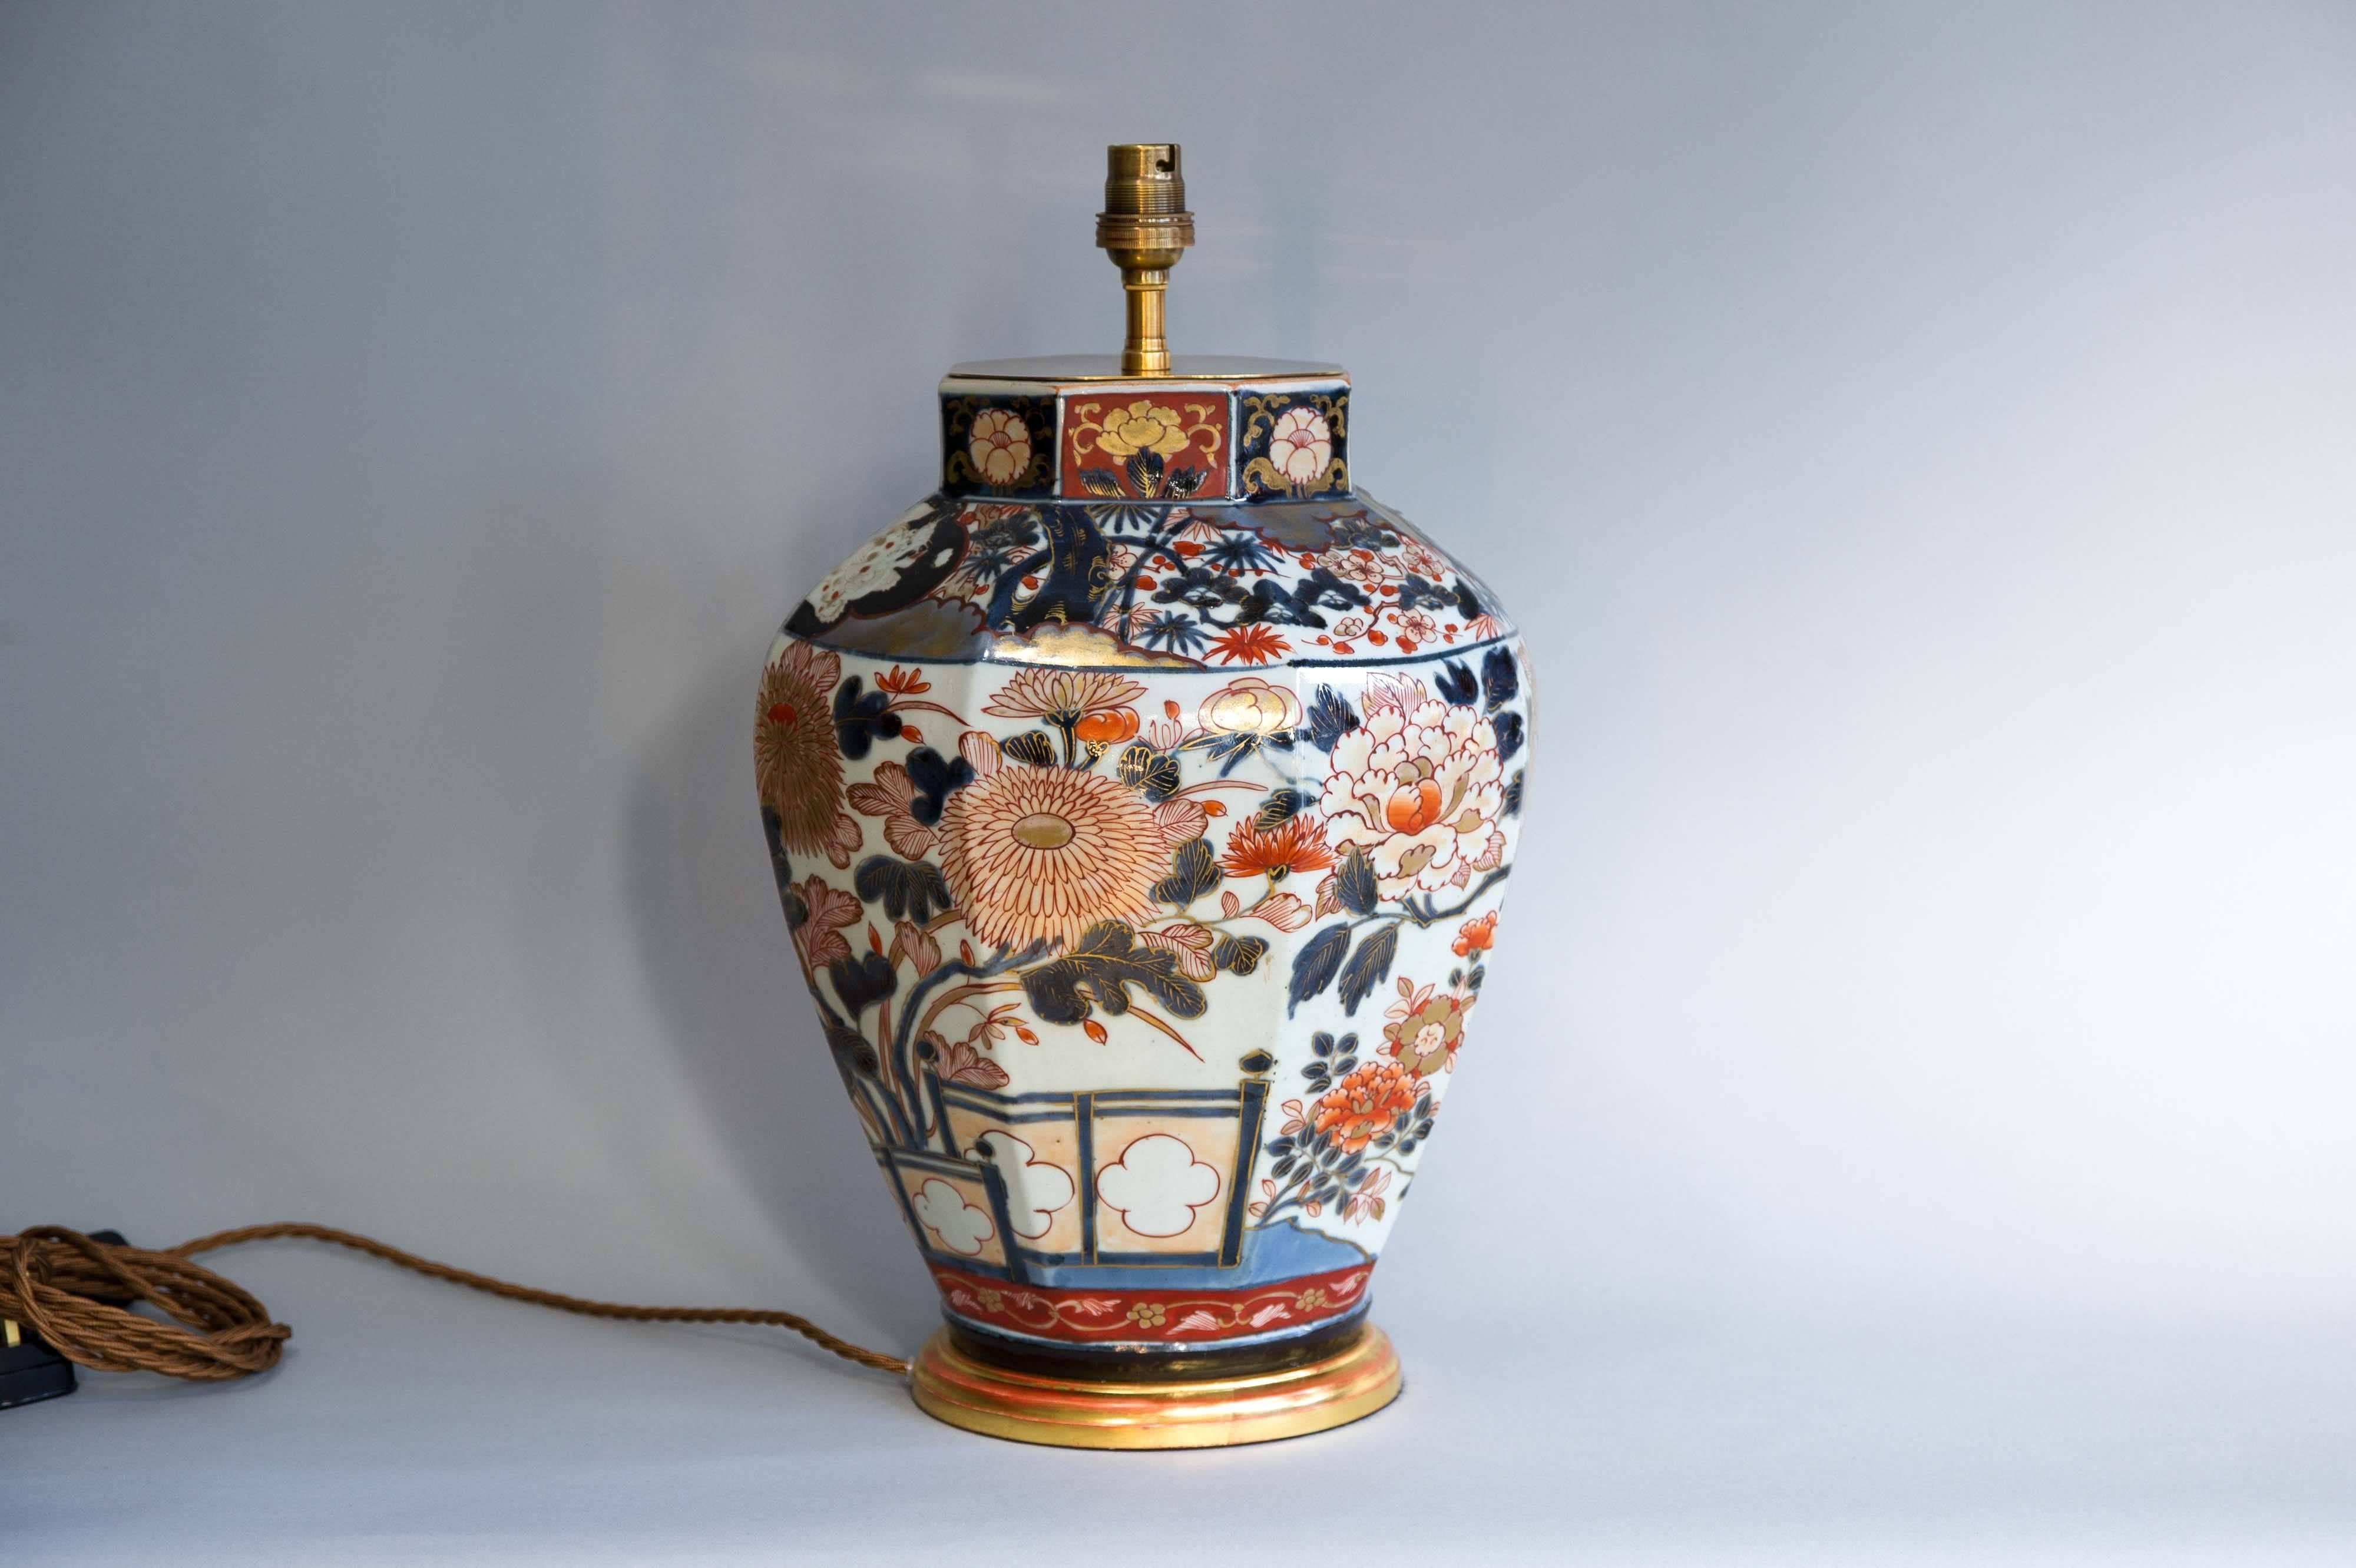 An exceptionally decorated octagonal shaped medium sized Japanese Imari vase dating, circa 1700. Large floral panels showing chrysanthemums and peonies. The collar decorated with kara shi-shi dogs on black backgrounds. The vase features an